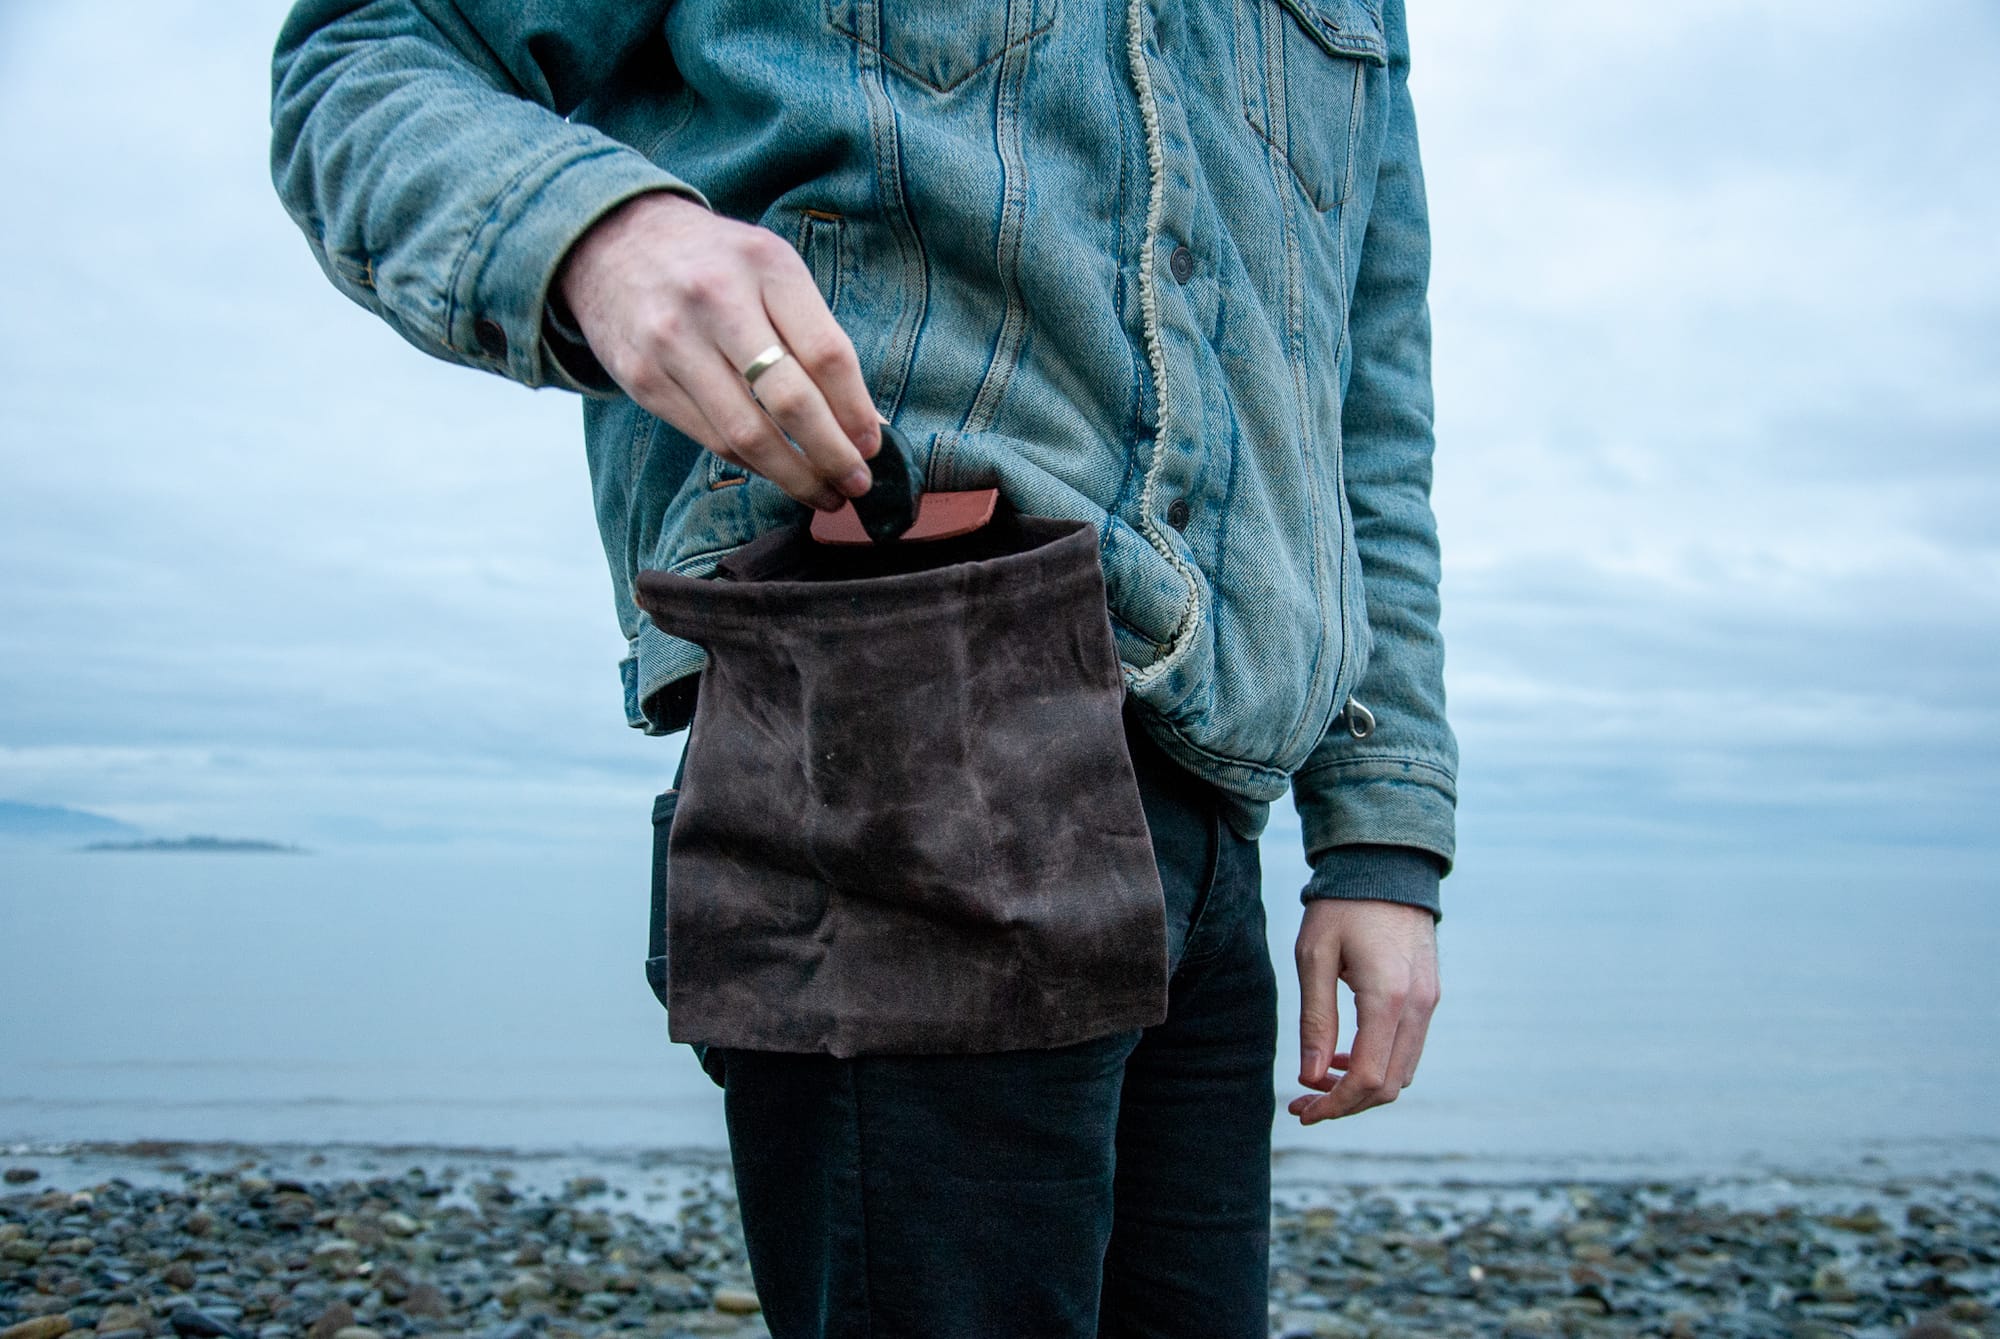 Man in a light denim jacket places a rock in his brown canvas foraging pouch while standing on the beach